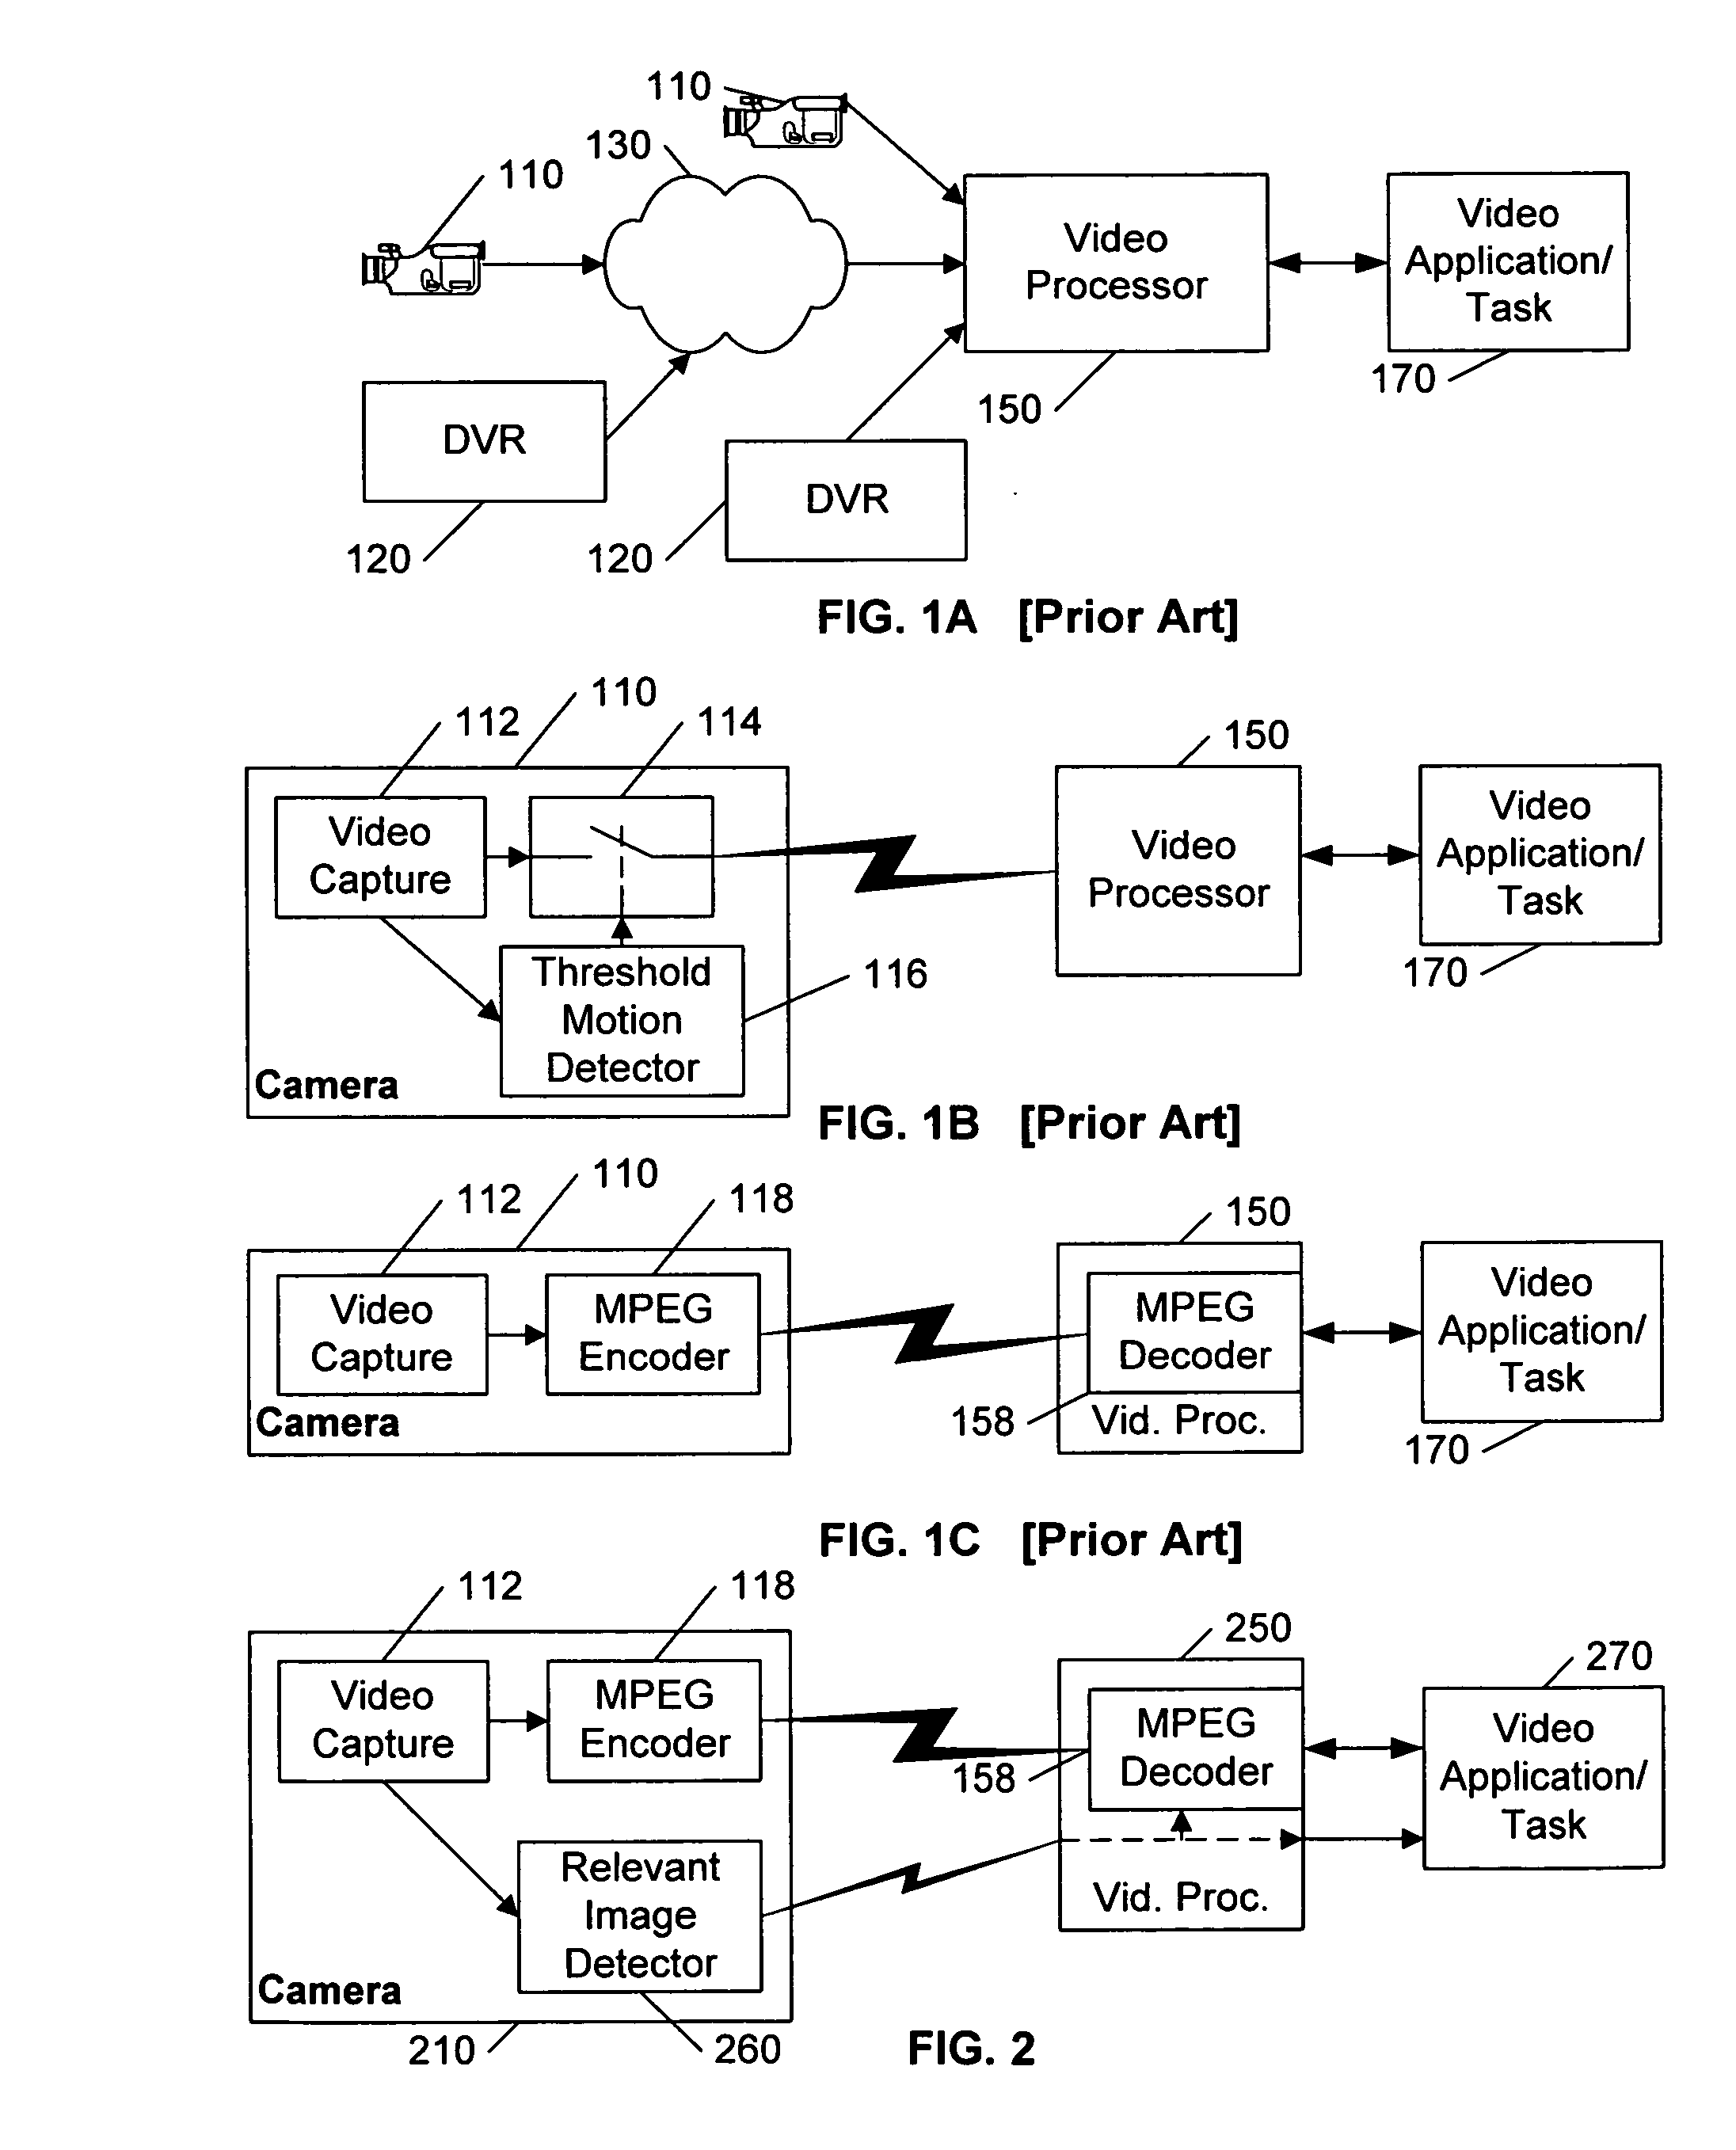 Relevant image detection in a camera, recorder, or video streaming device